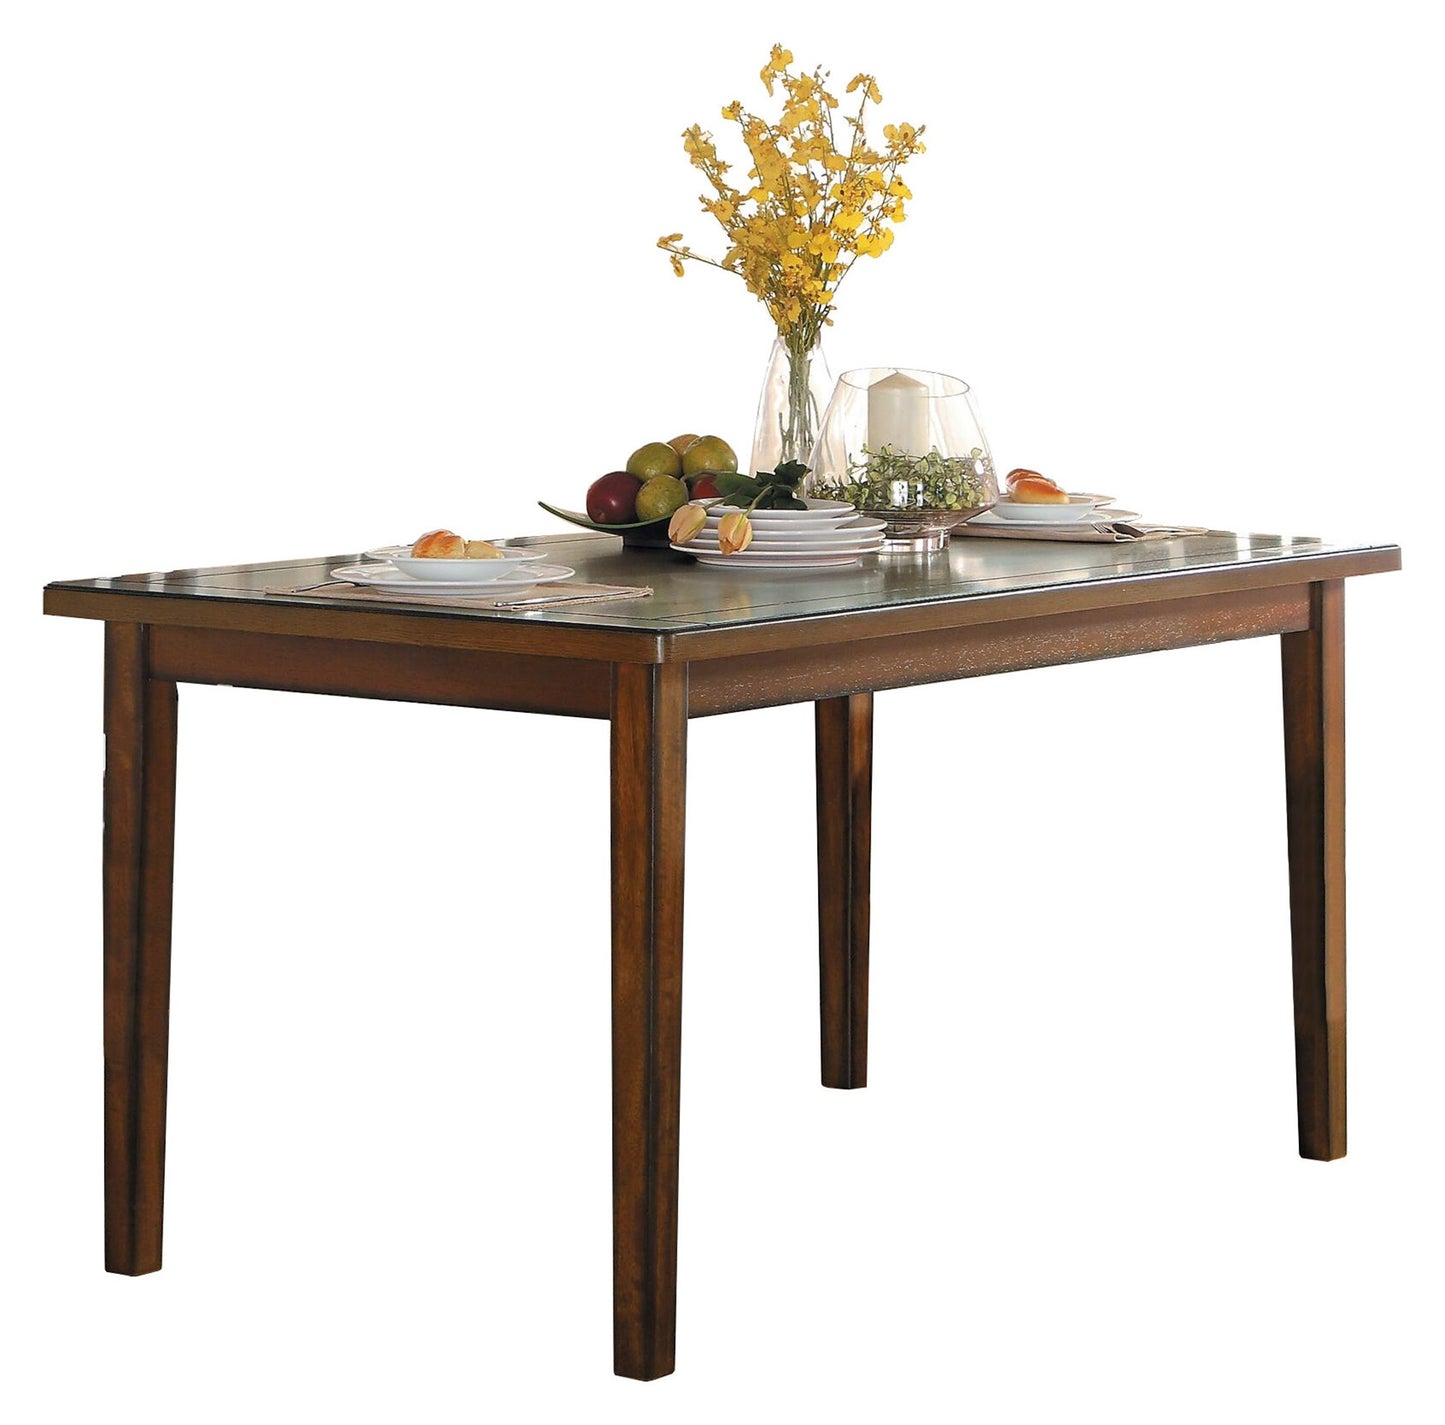 Homelegance Delmar 6PC Dining Set Table, 4 Chair, Bench in Brown